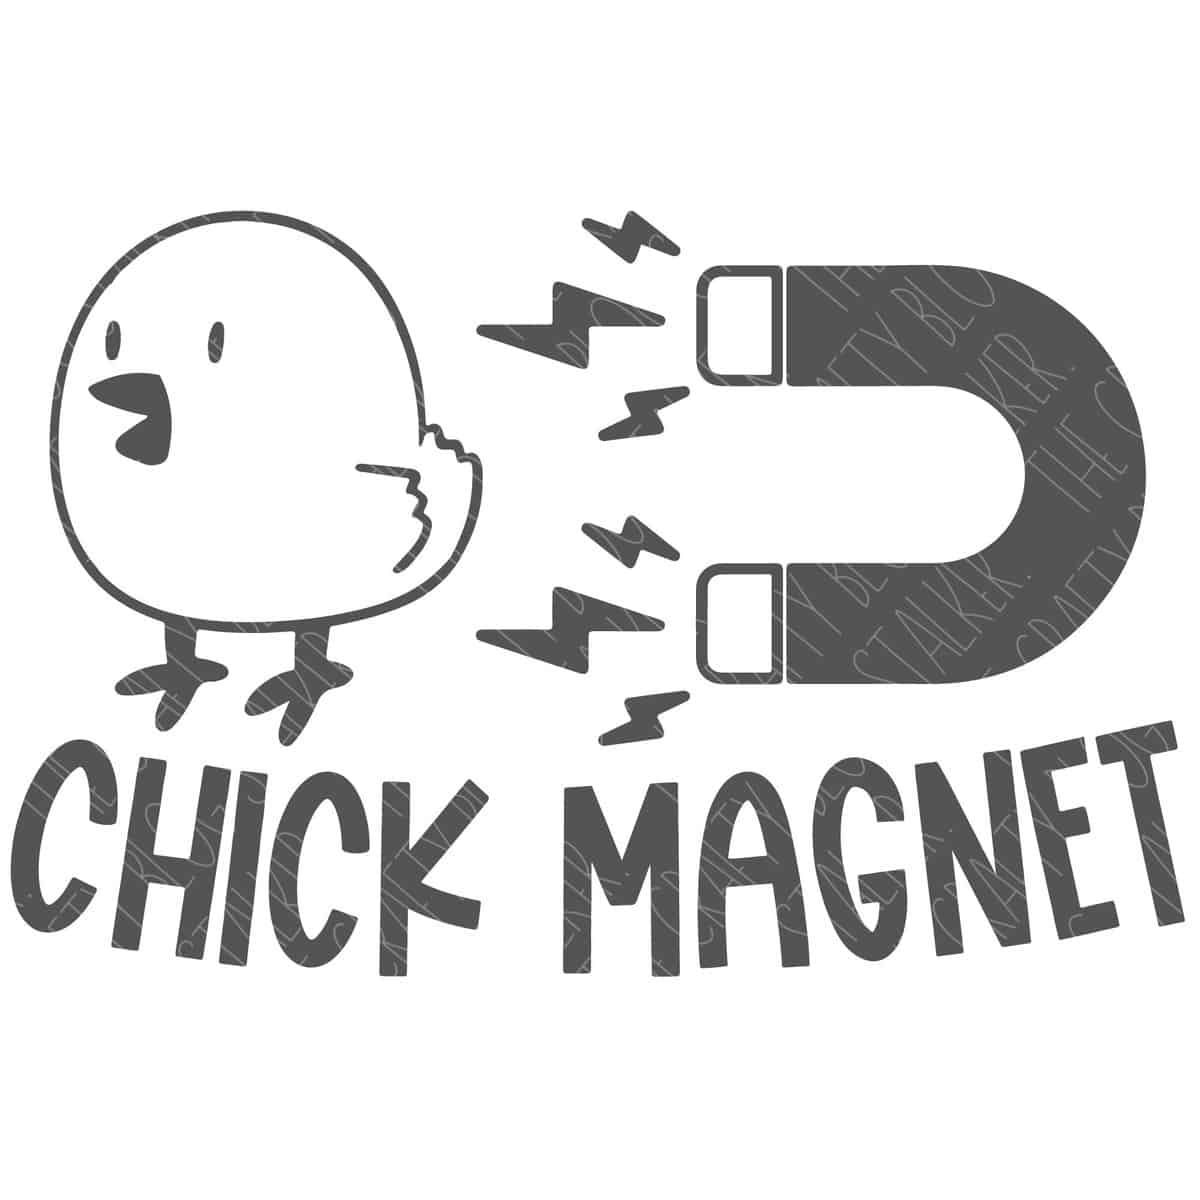 Get egg-cited with our 'Chick Magnet' SVG Cut File! Ideal for Easter or chicken enthusiasts. Perfect for shirts, mugs, and more. Grab yours now!